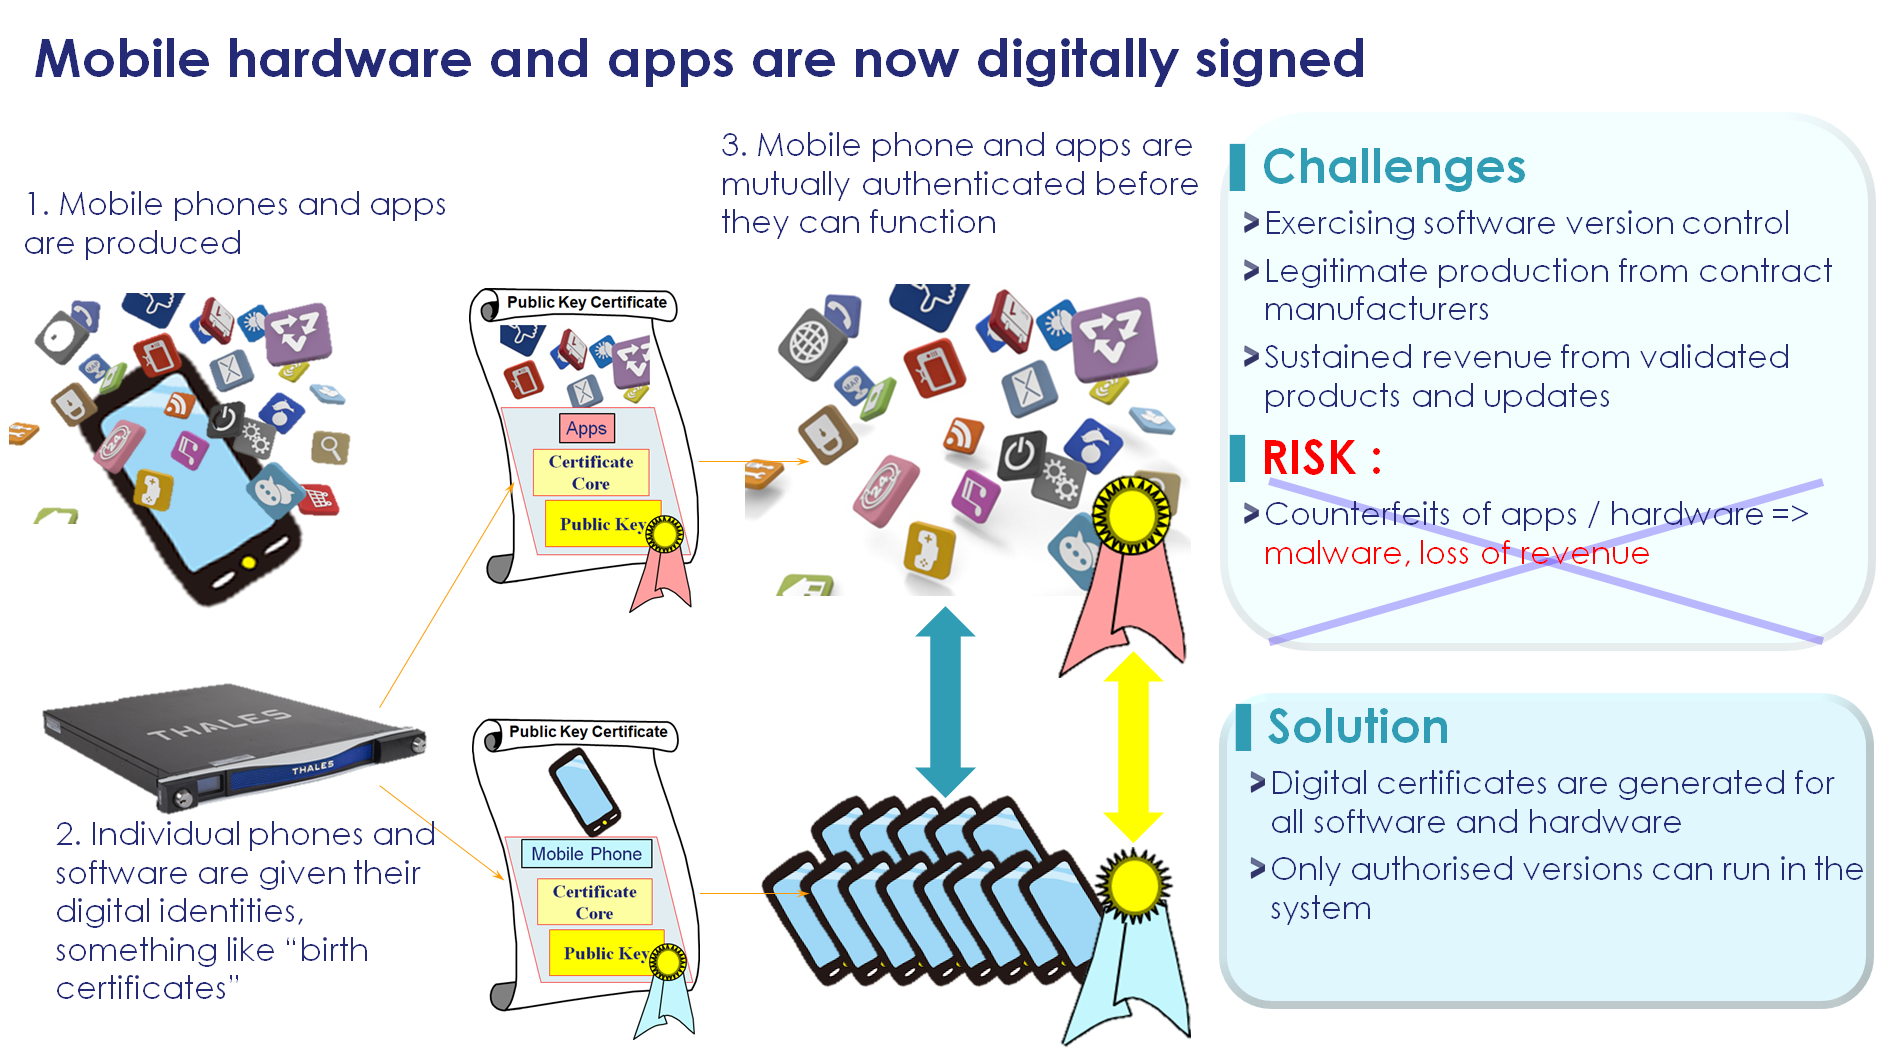 Mobile hardware and apps are now digitally signed